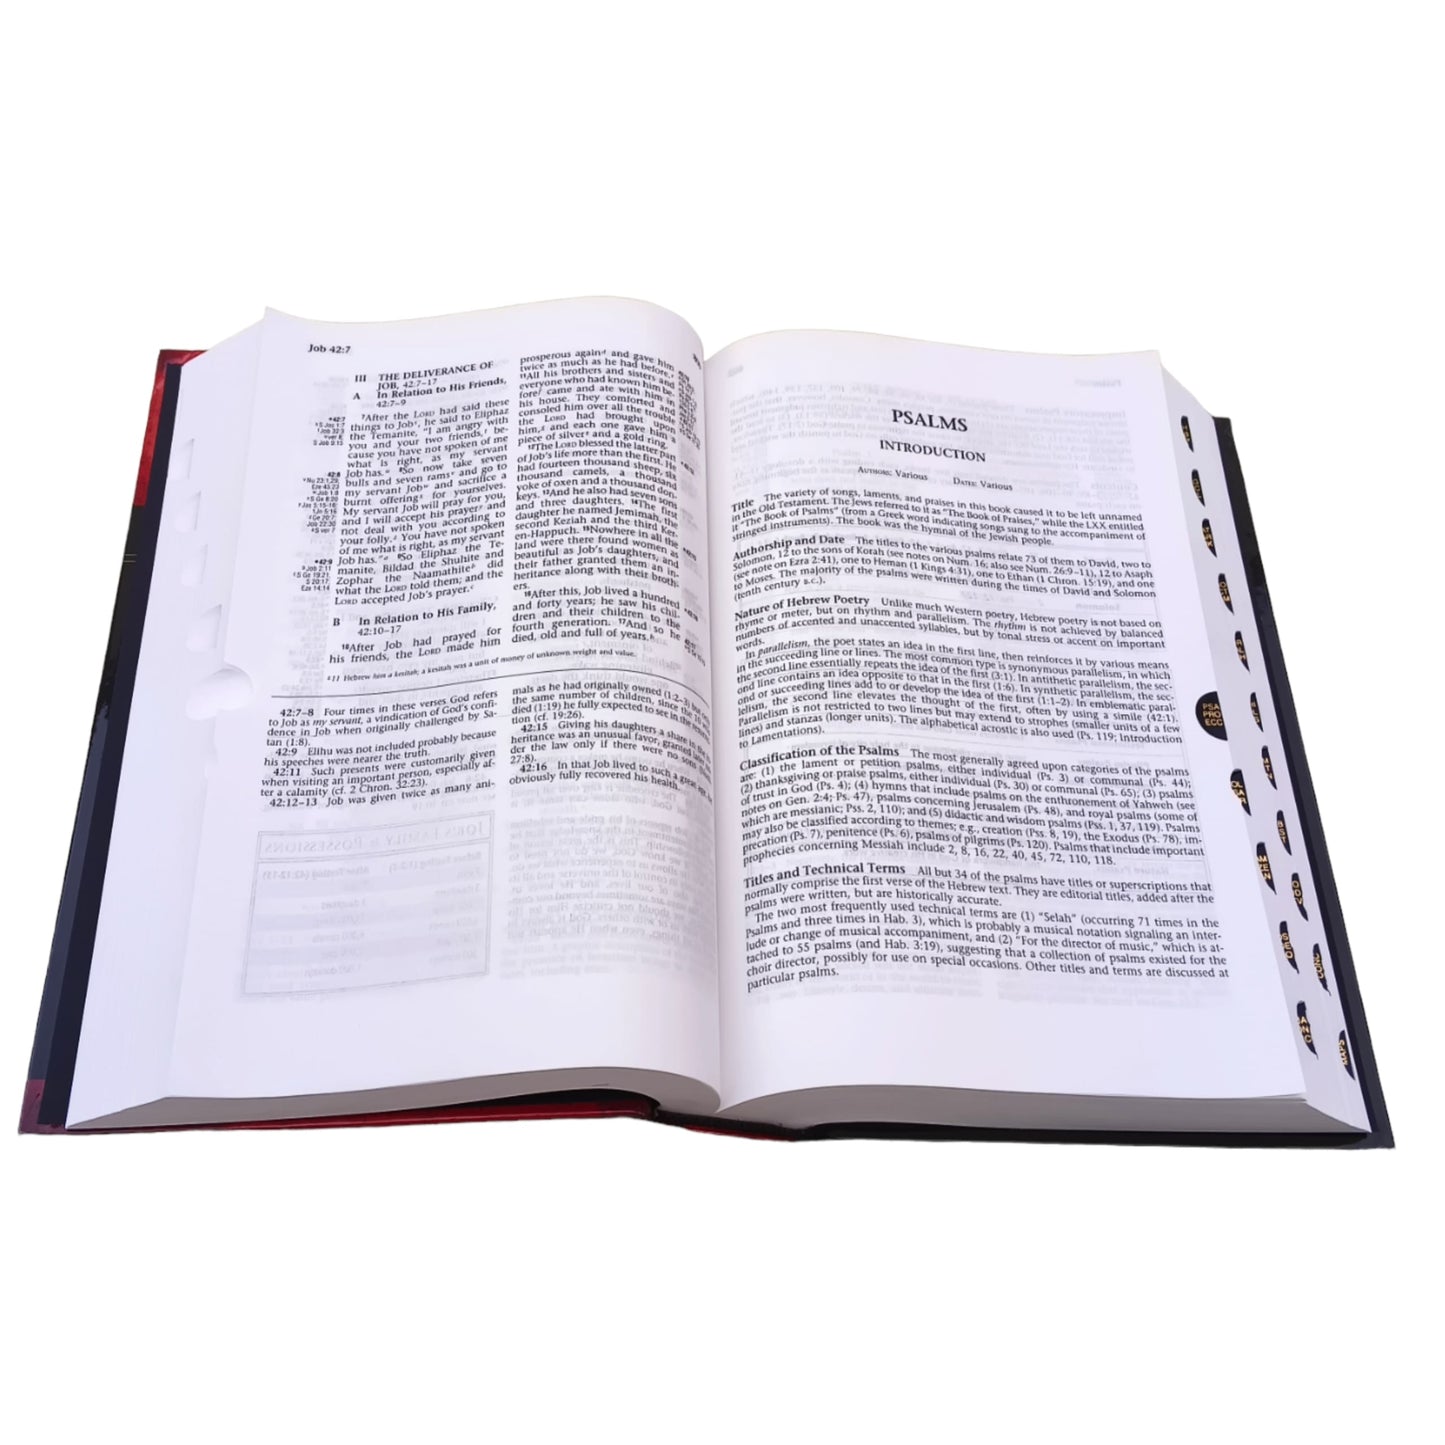 The RYRIE Niv Study Bible With Index